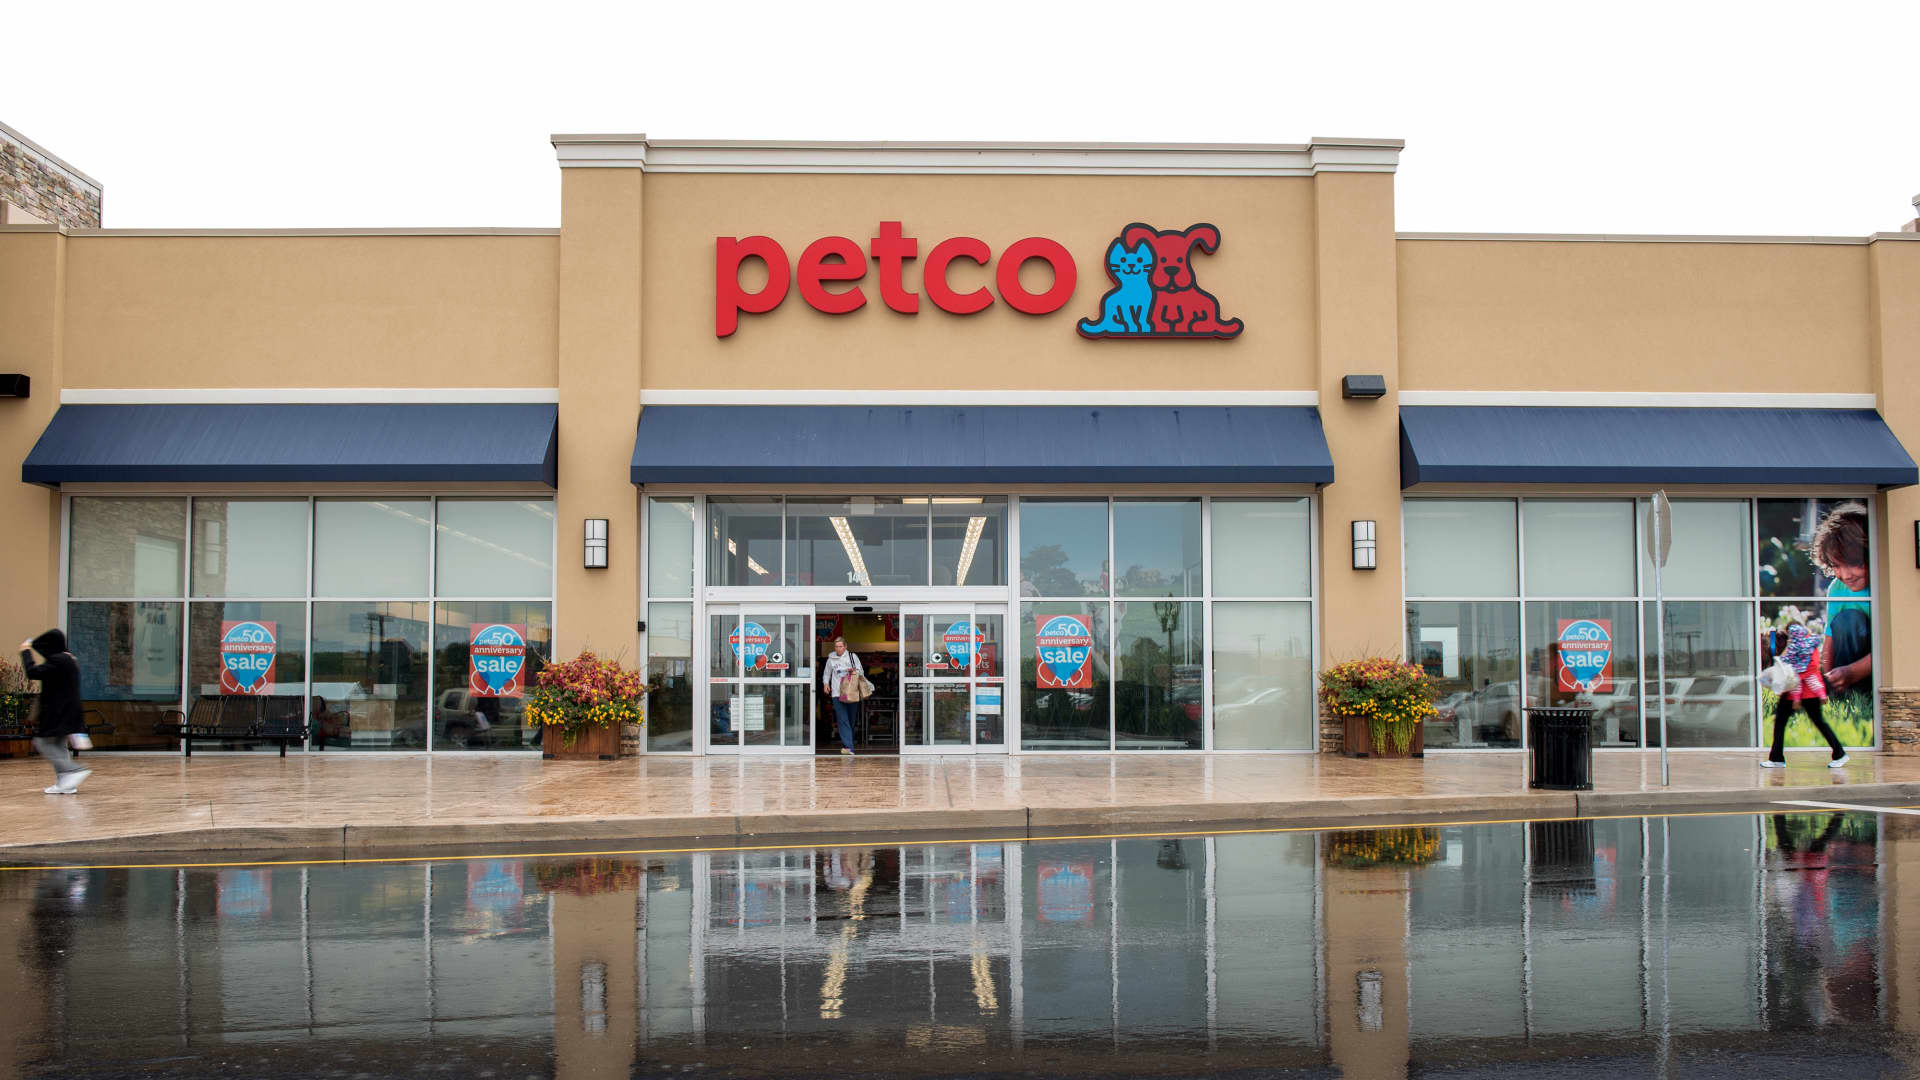 Petco CEO says company's growth is inflation-proof, as Americans splurge on pets and bigger homes